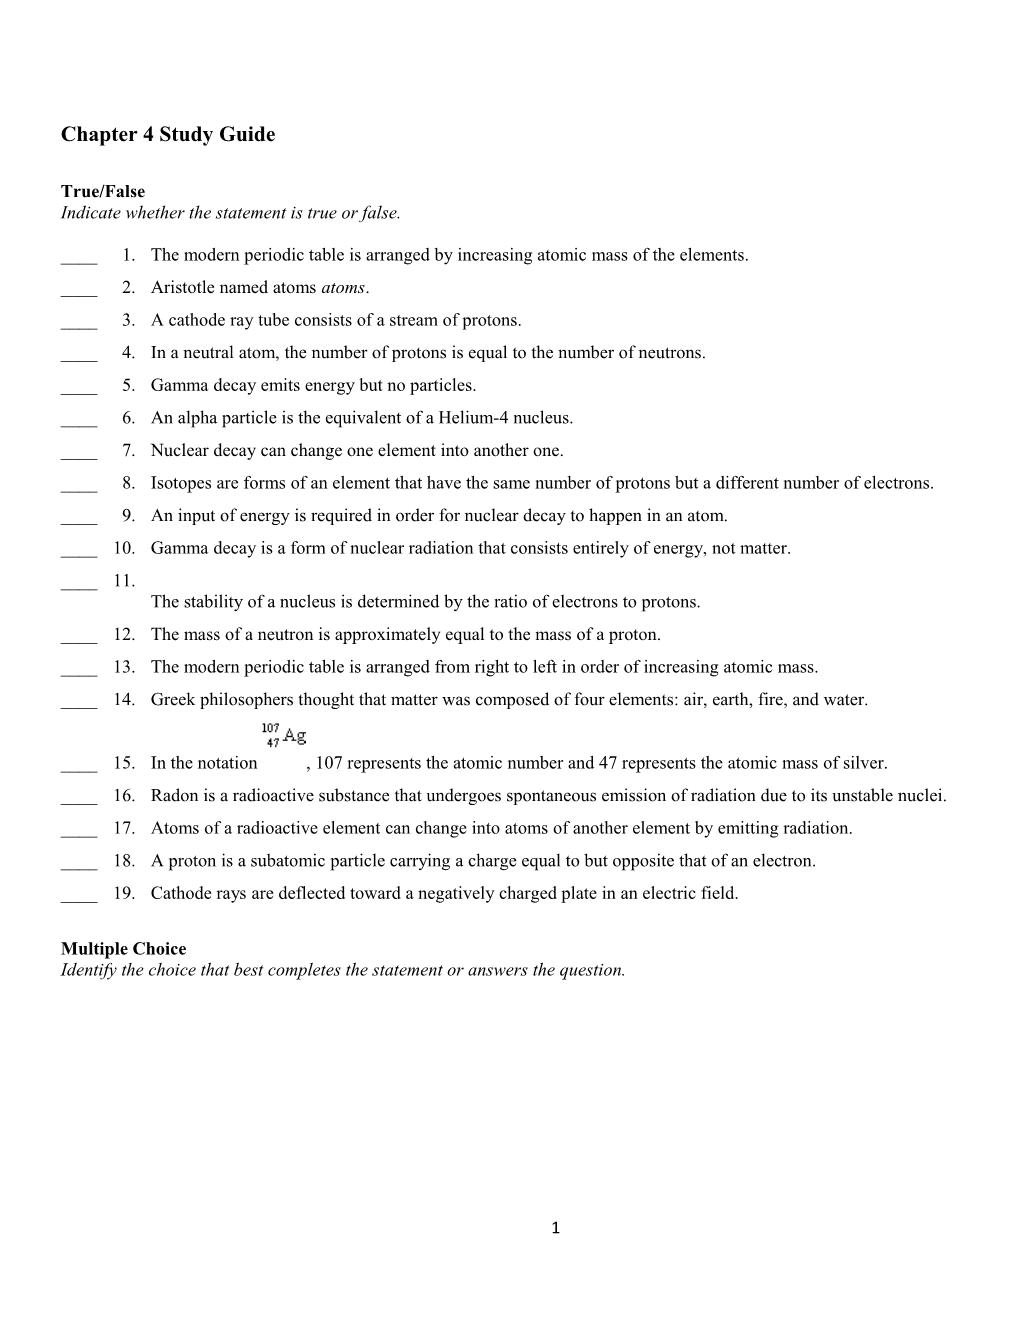 Chapter 4 Study Guide s2